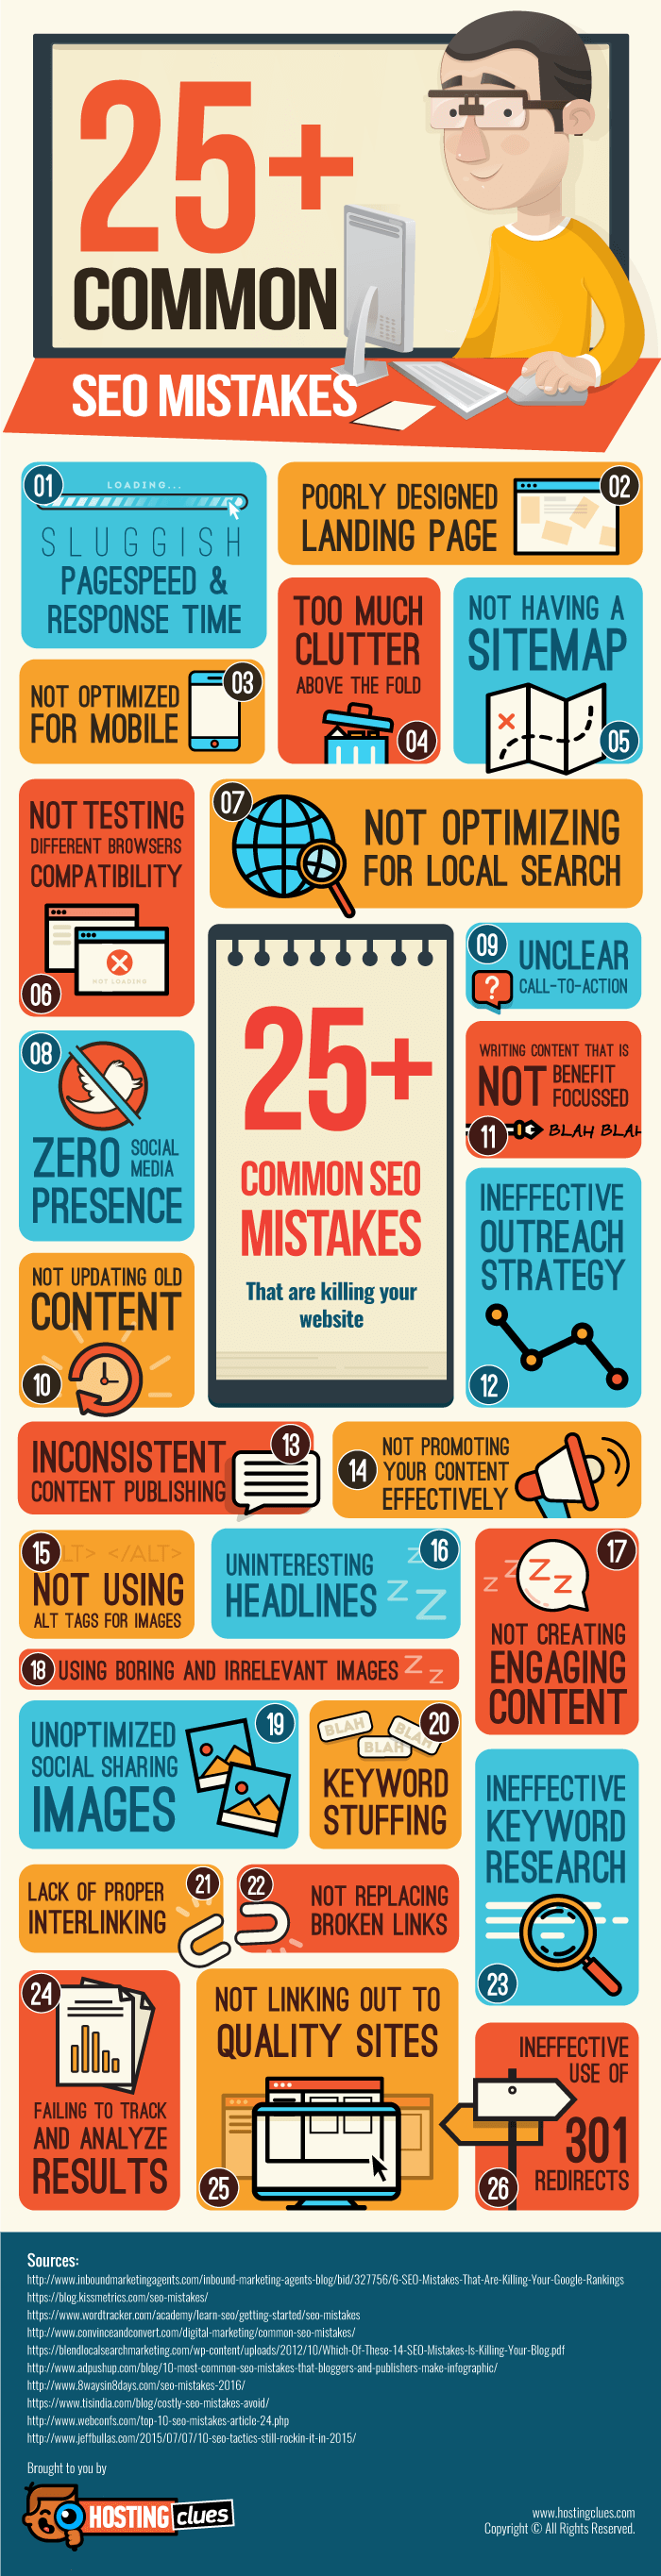 The SEO Mistakes Infographic, published to: "25+ Common SEO Mistakes Small Businesses Make"